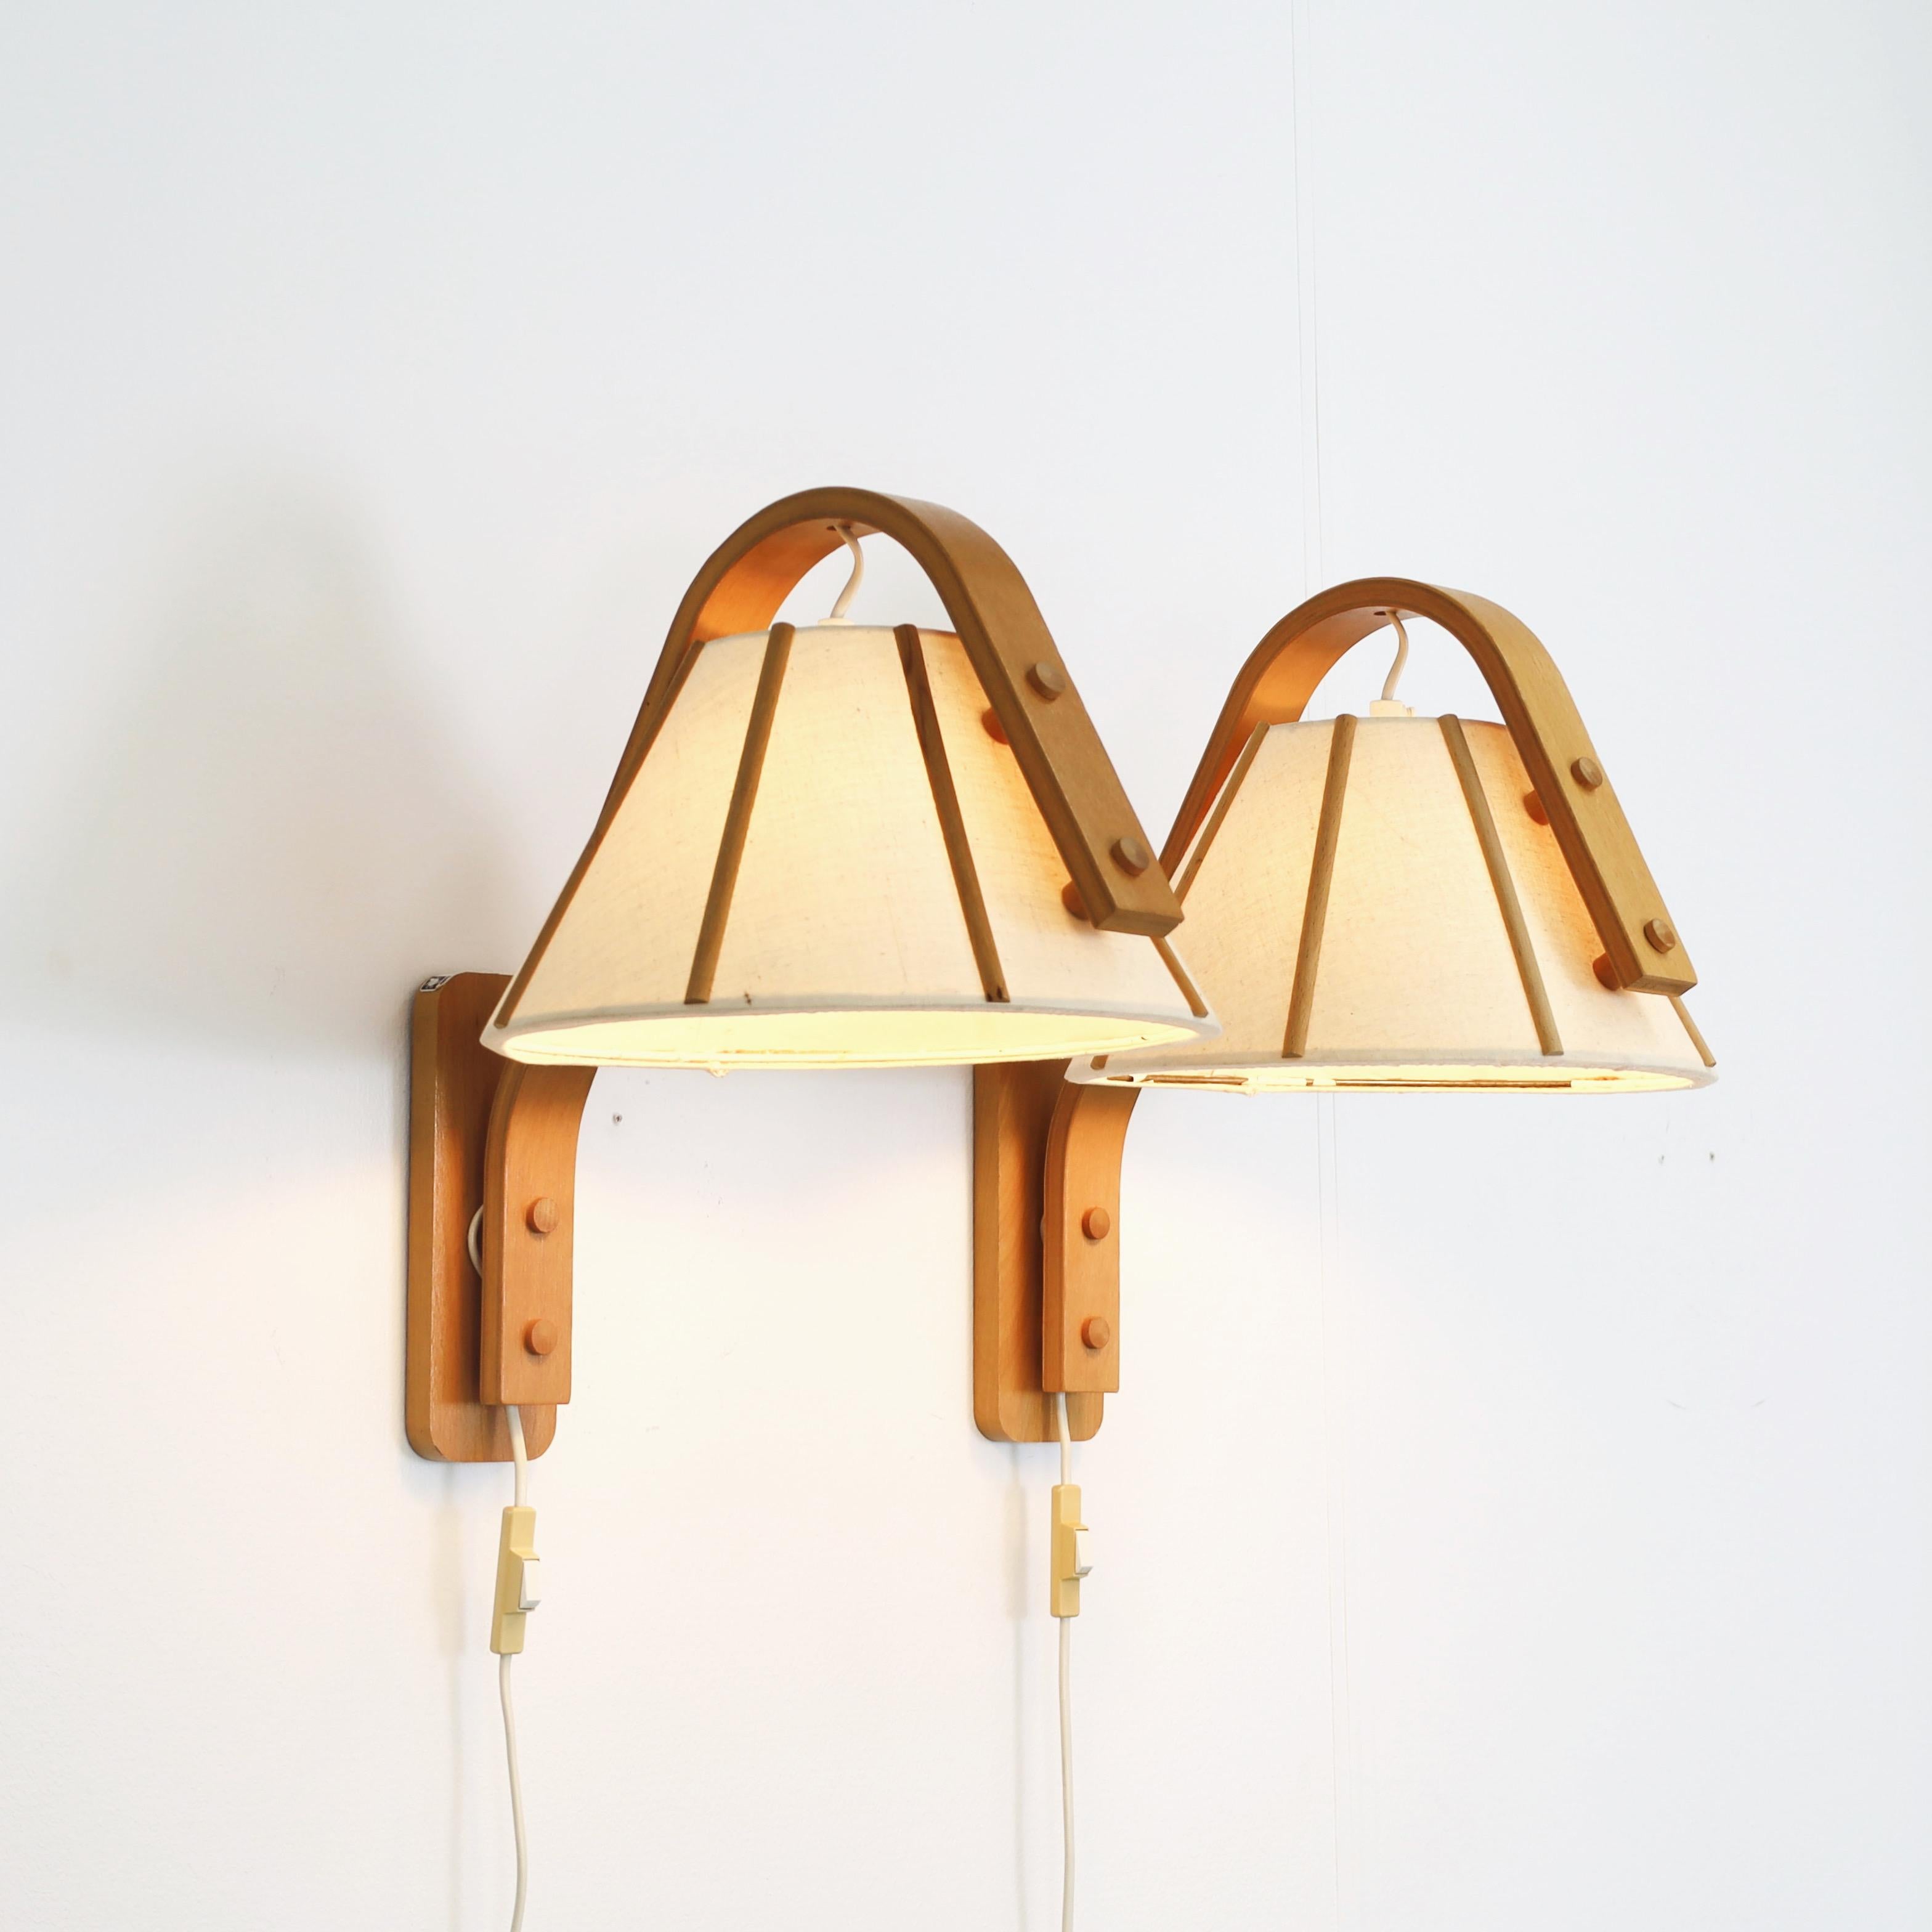 Set of 4 Scandinavian Modern sconces in bend Beech wood designed by Jan Wickelgren in the 1970s for Aneta Sweden.  A Nordic quartet for a beautiful home.

* A set of four (4) bend beech veneer wall lamps with light cream-coloured shades in canvas
*